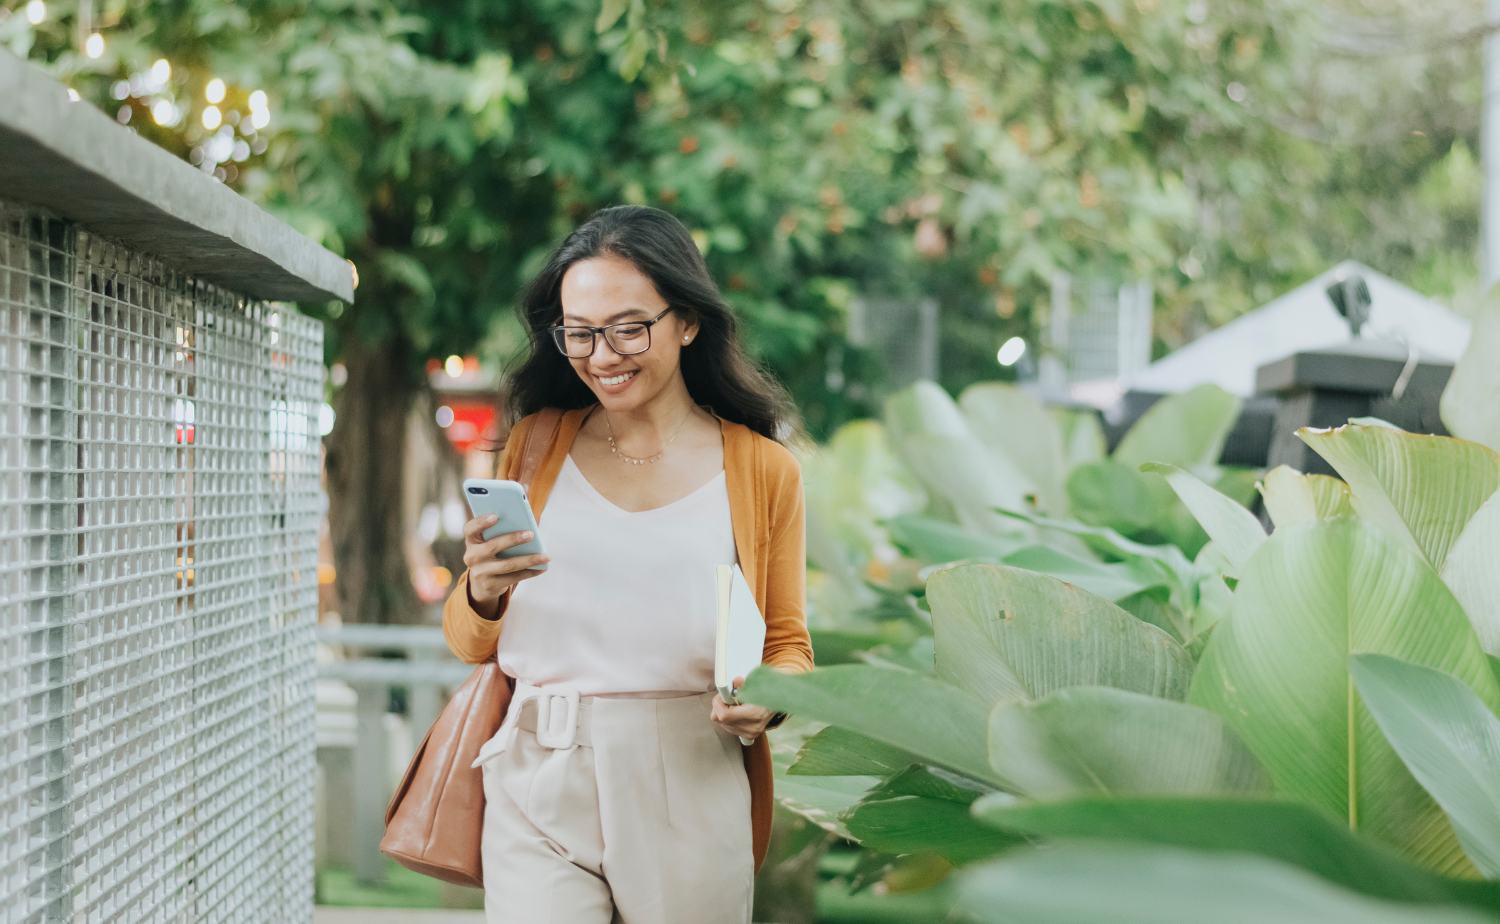 A young woman walking outdoors and looking at her smartphone with a smile. She is wearing glasses, a white top, and a light brown cardigan, carrying a brown shoulder bag and a notebook. The background features lush green plants and a blurred urban setting.